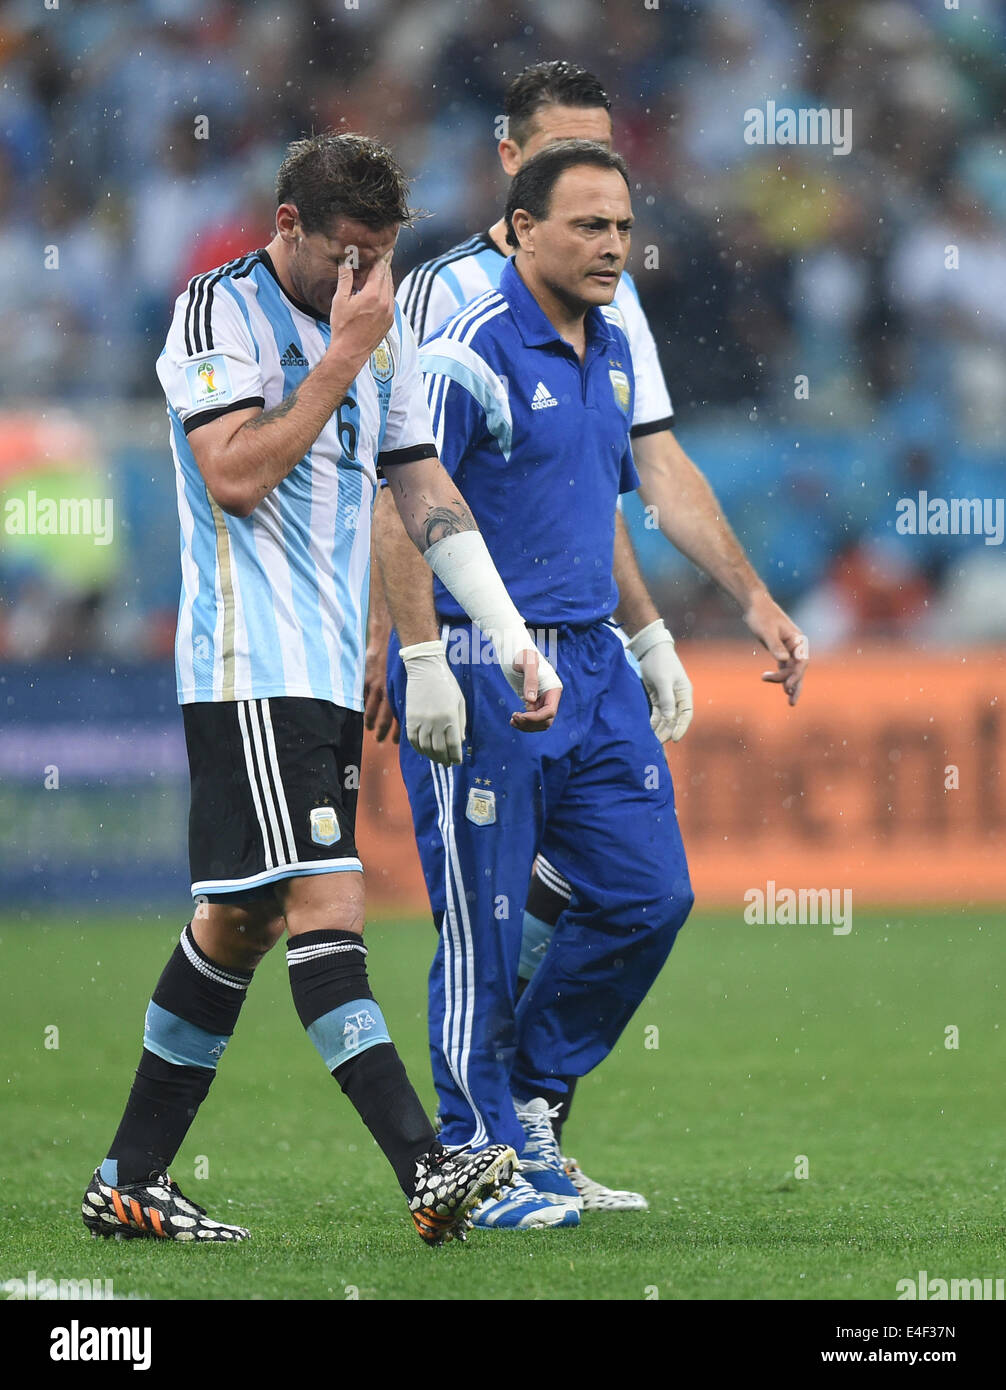 Sao Paulo, Brazil. 09th July, 2014. Lucas Biglia (L) of Argentina reacts during the FIFA World Cup 2014 semi-final soccer match between the Netherlands and Argentina at the Arena Corinthians in Sao Paulo, Brazil, 09 July 2014. Photo: Marius Becker/dpa/Alamy Live News Stock Photo